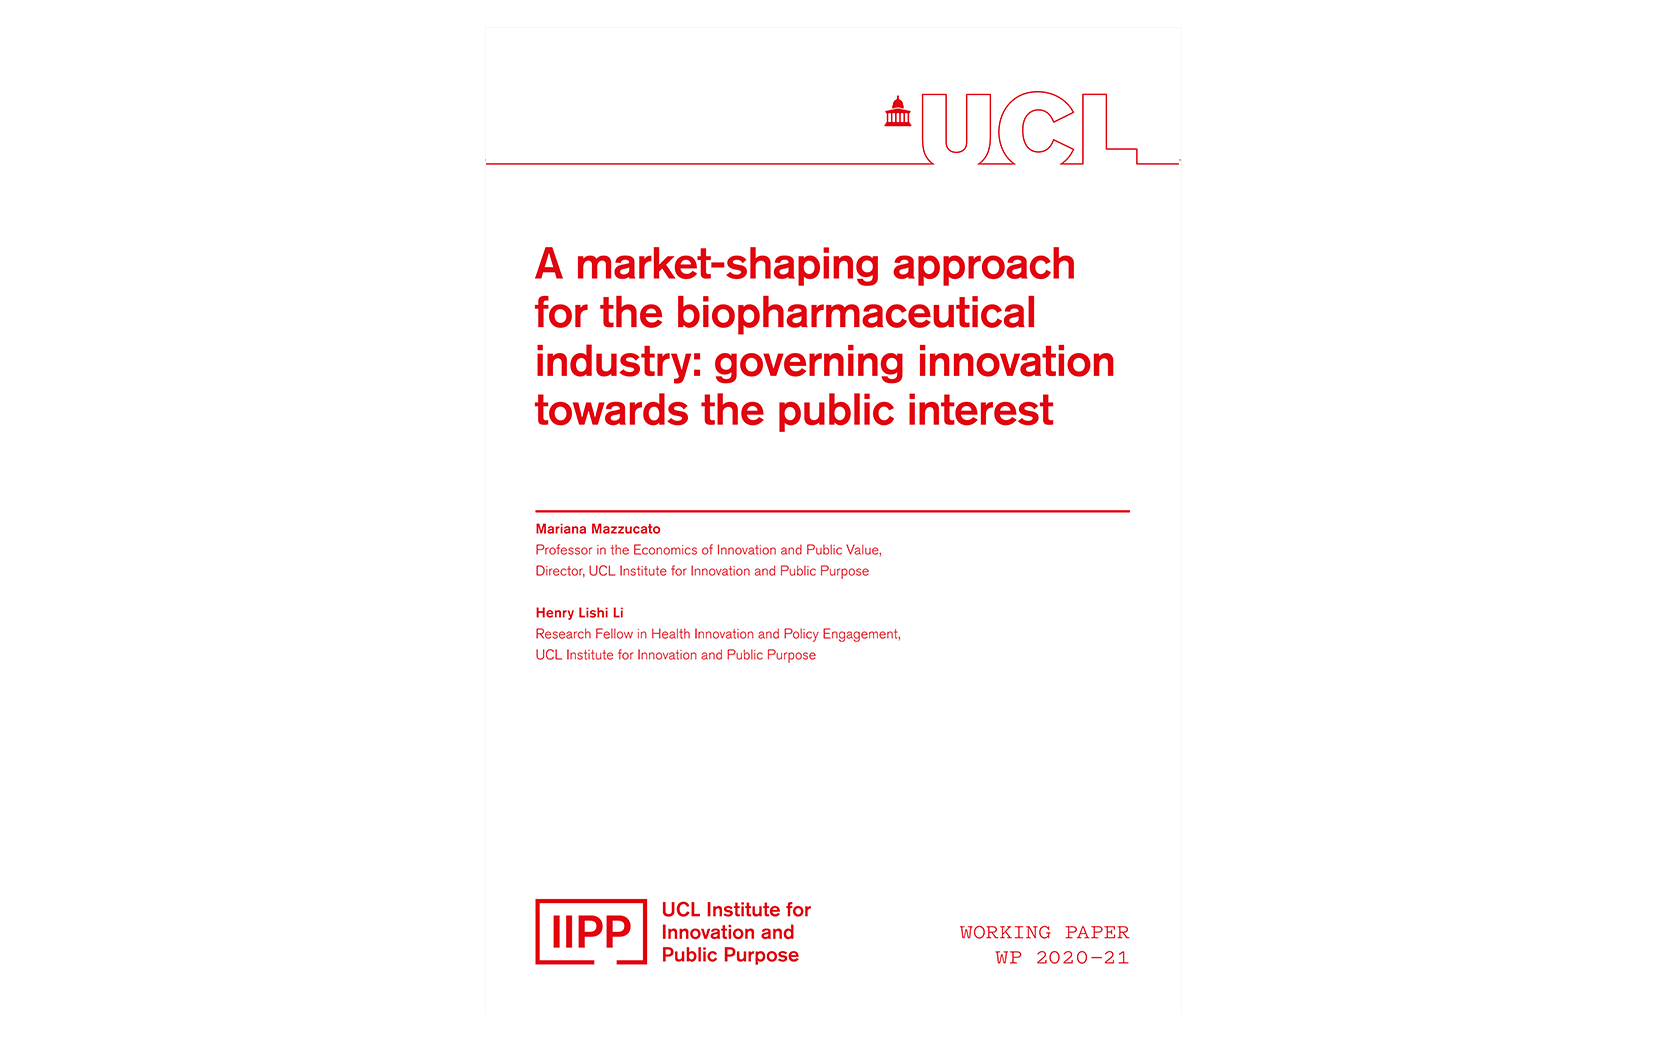 cover_final_iipp-wp2020-21-market-shaping_approach_for_the_biopharmaceutical_industry.png